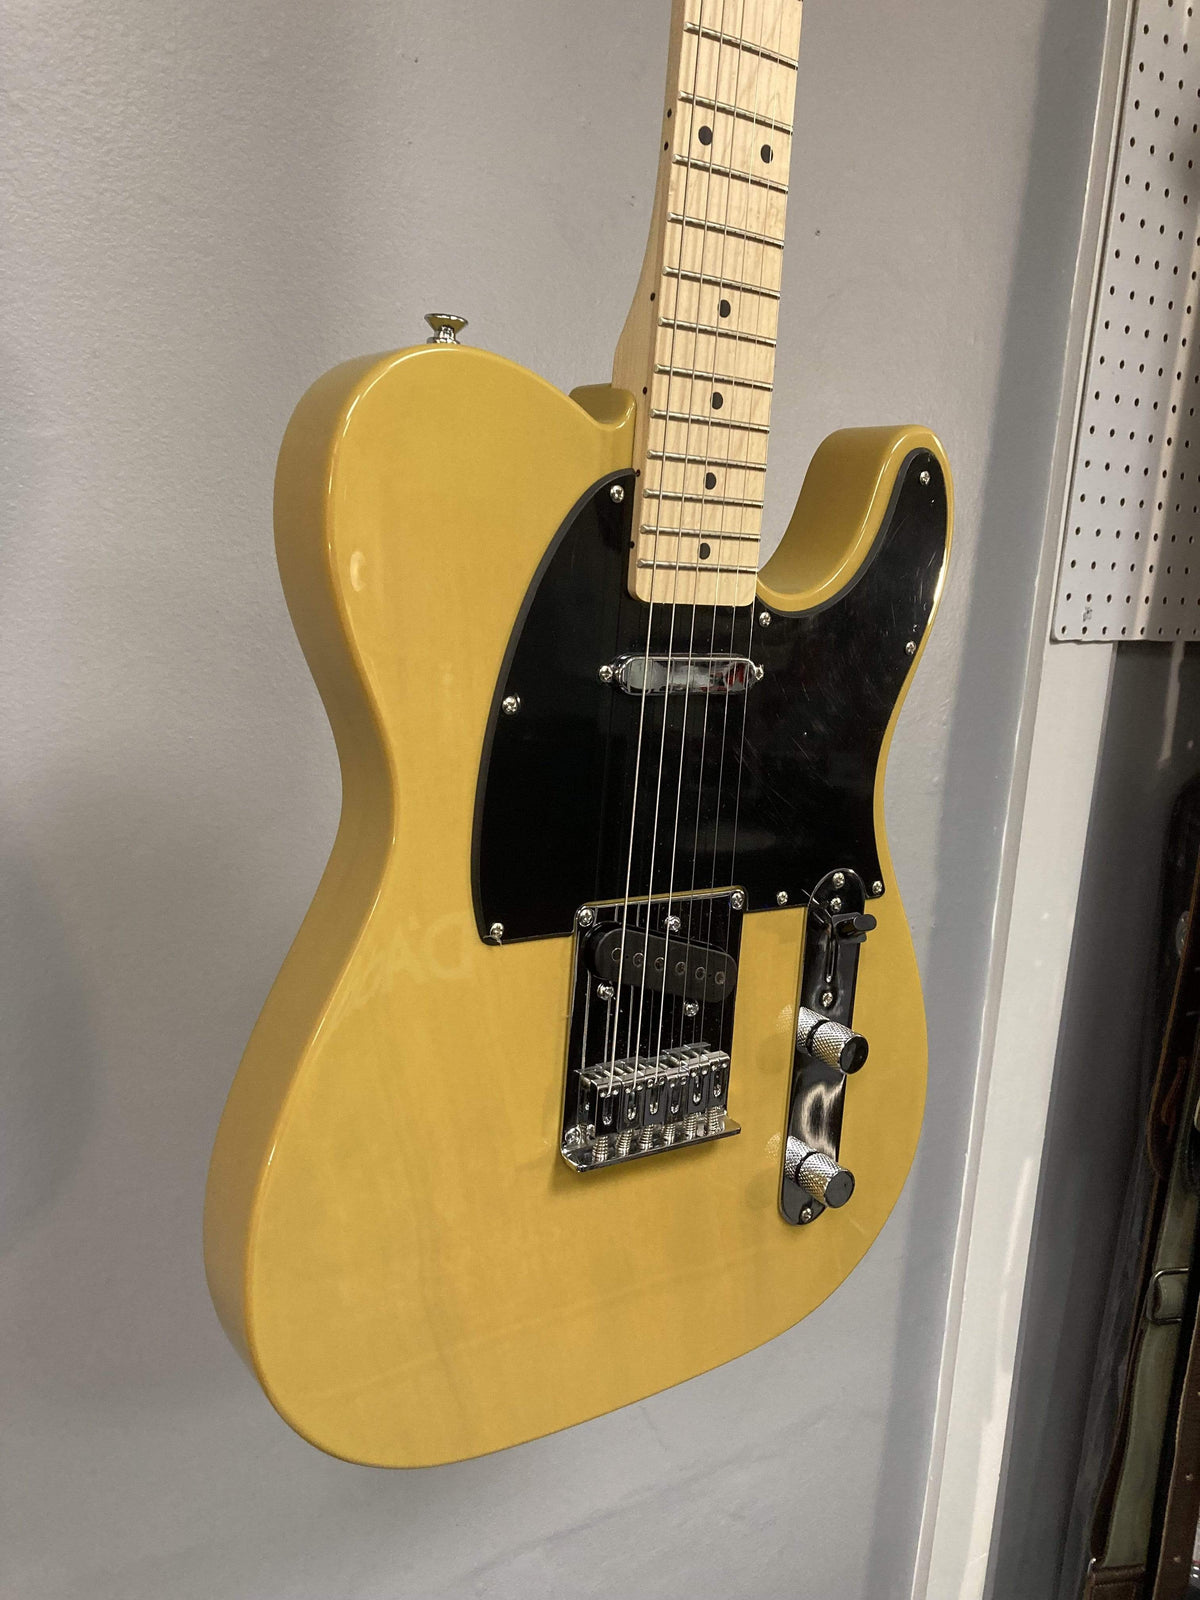 Squier Affinity Telecaster BSB Electric Guitar (refurbished)